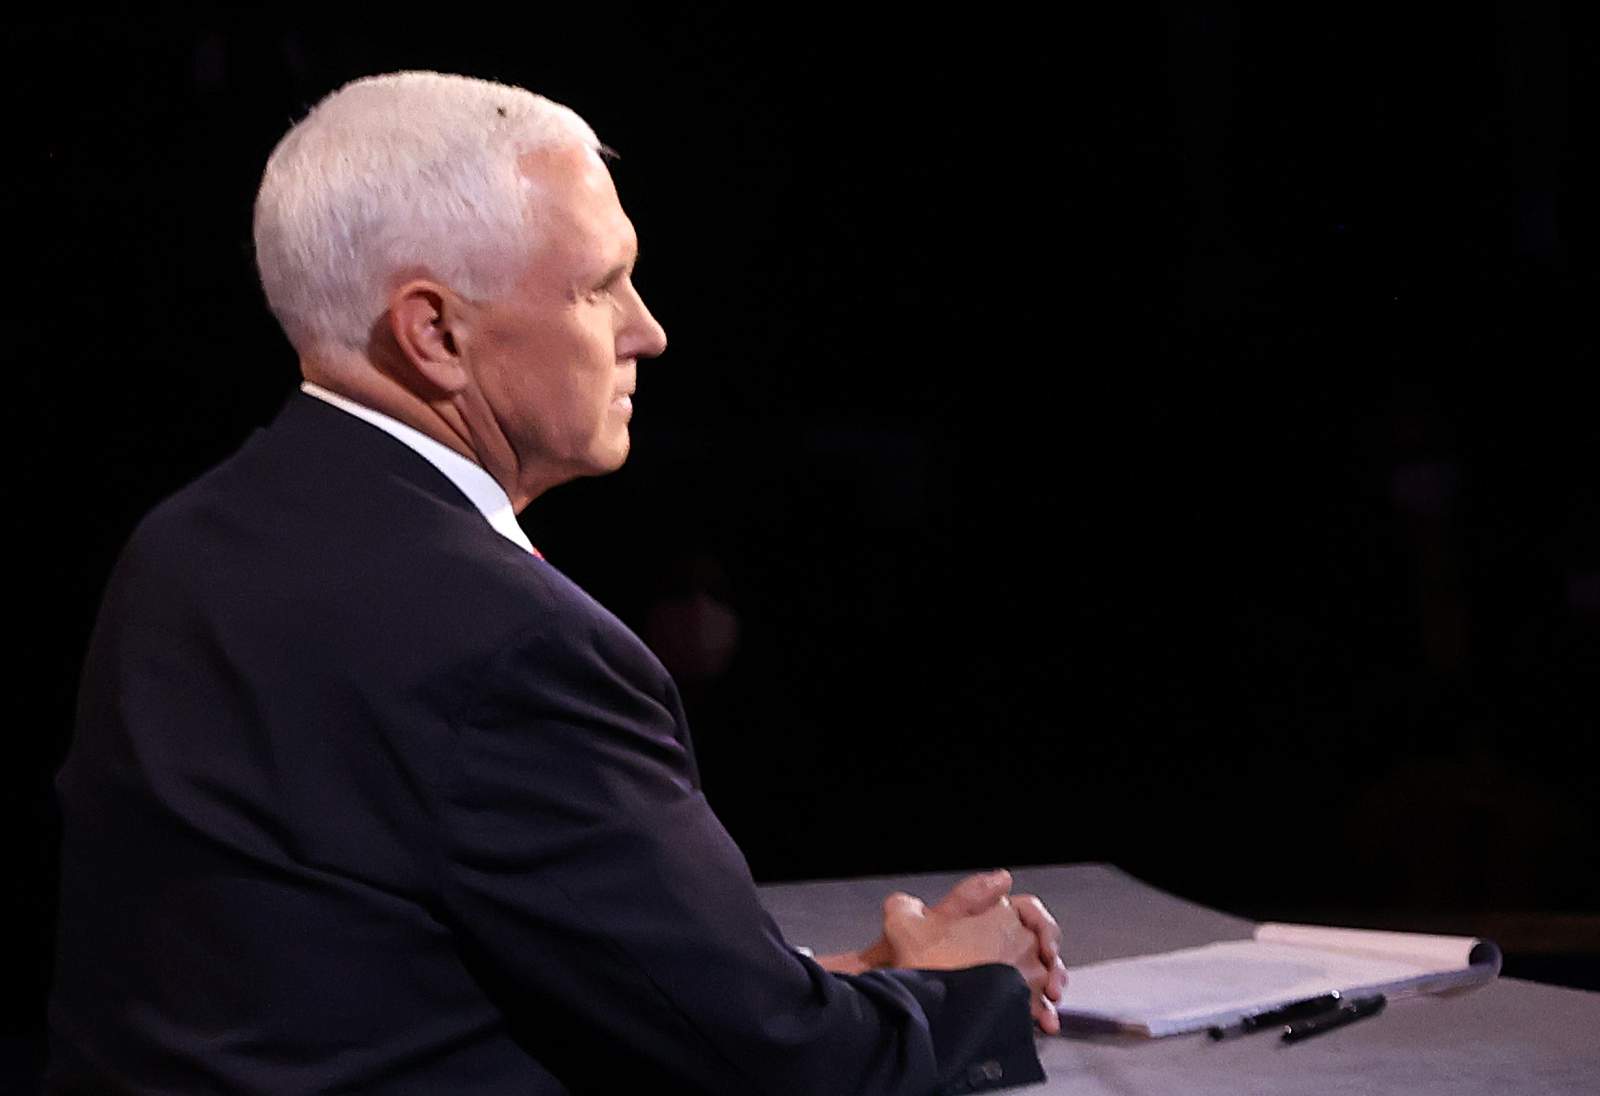 Fly lands on Vice President Pence’s head during debate, distracting internet